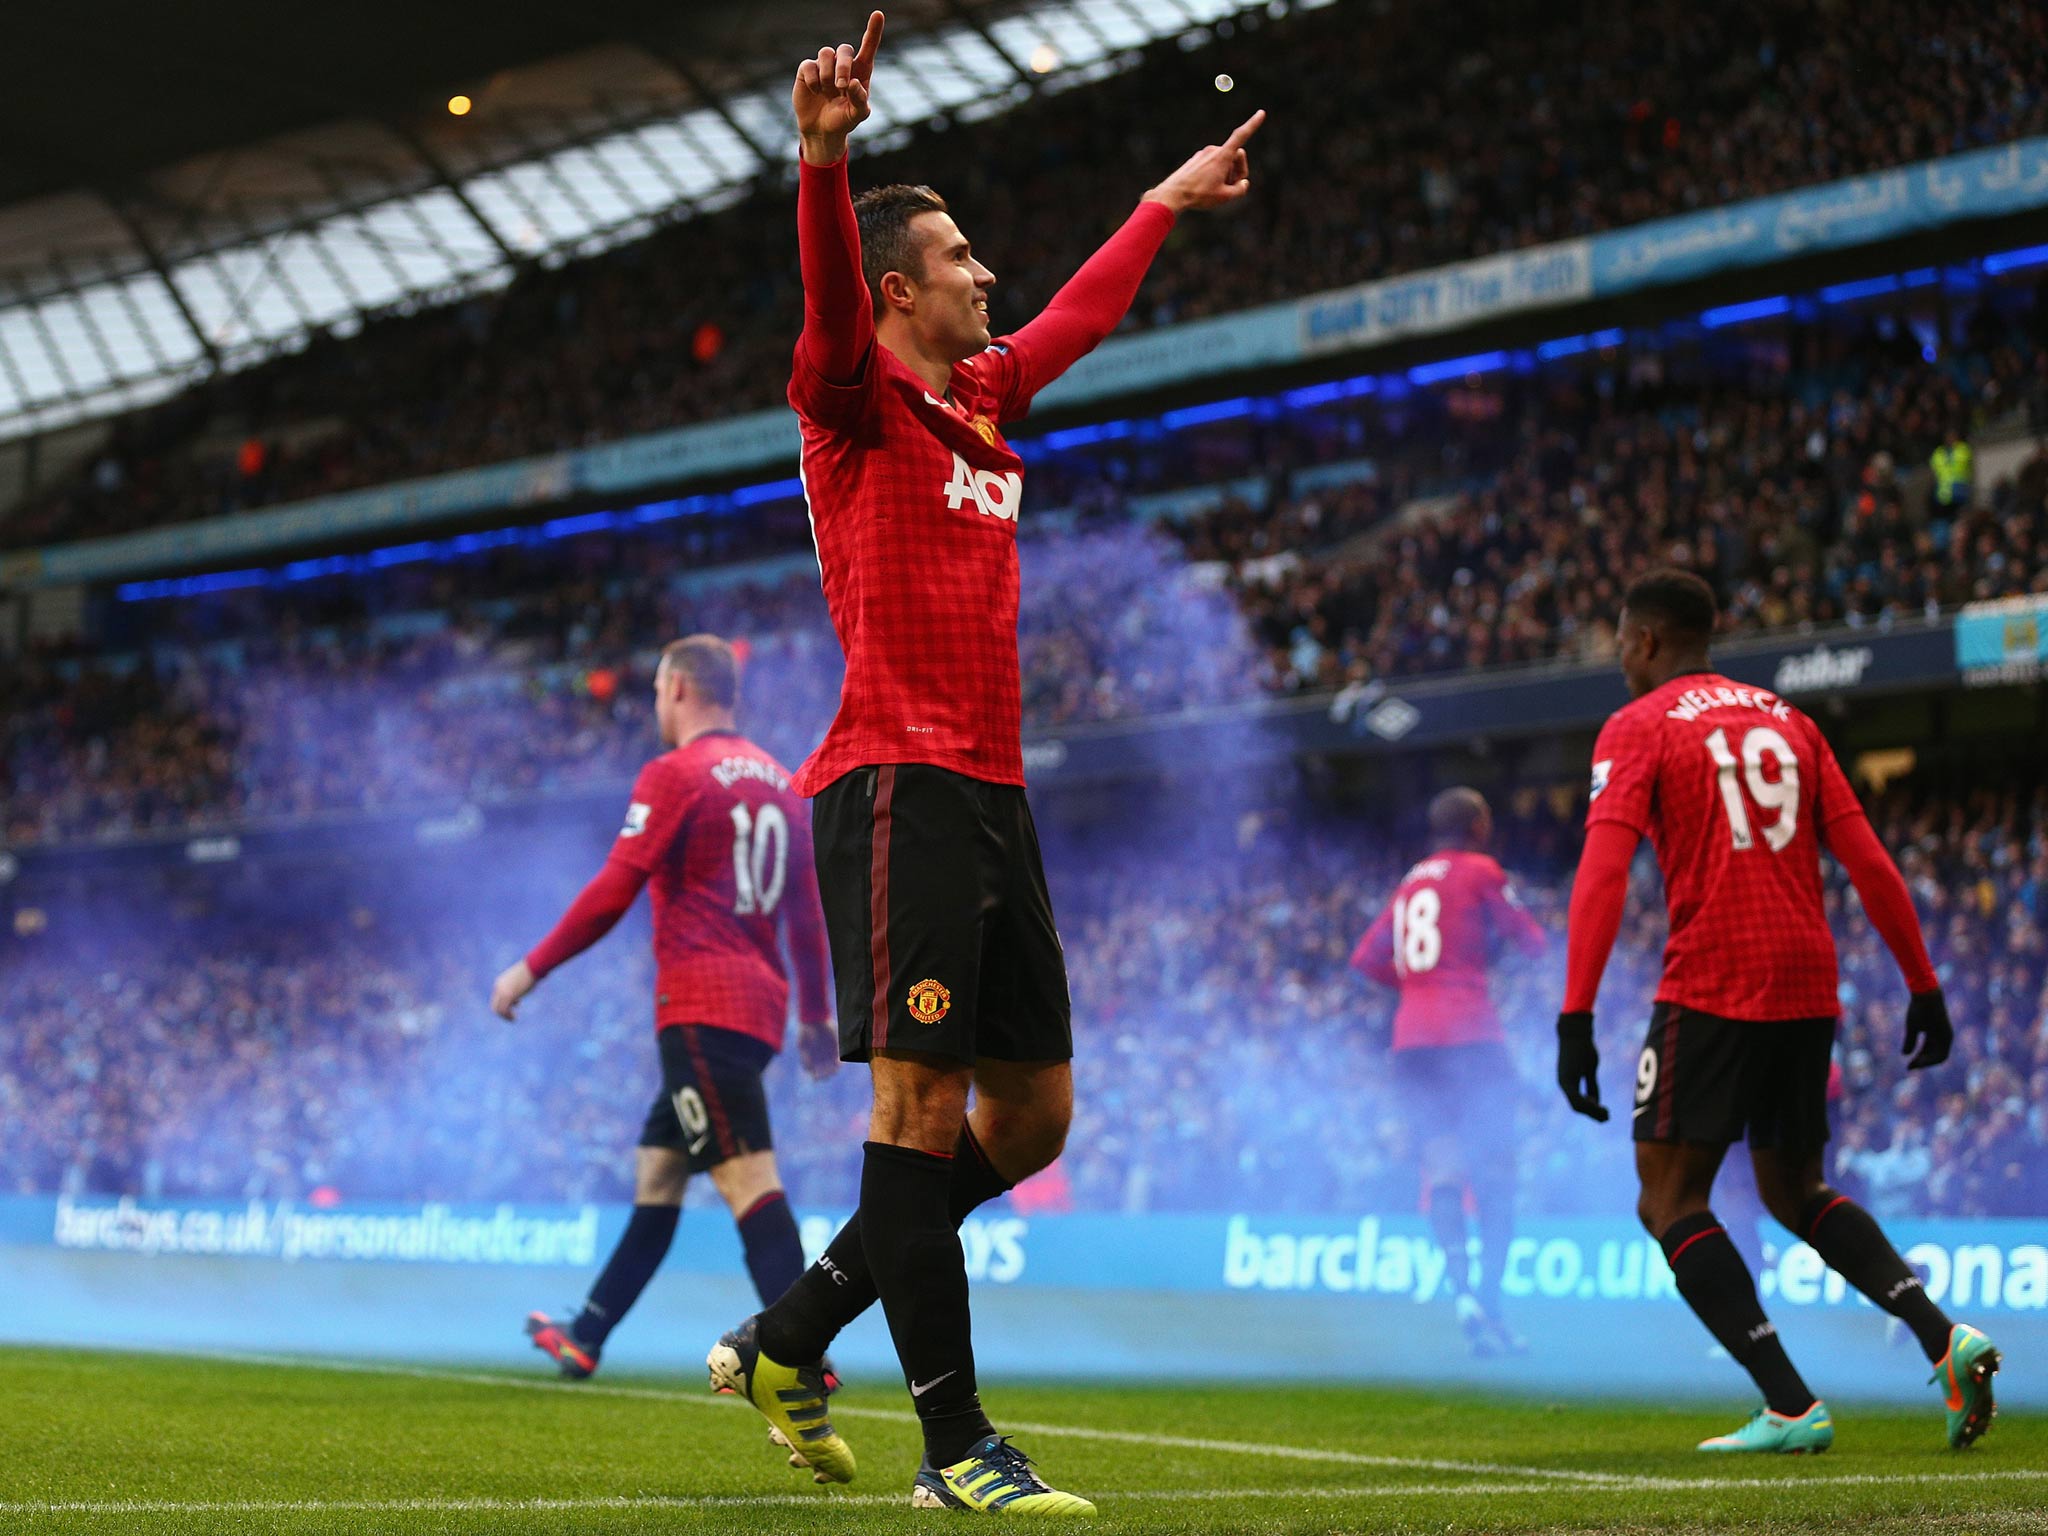 Manchester City 2-3 Manchester United 9 December 2012 Premier League Van Persie scored an injury time winner to send Manchester United six points clear of their City rivals. The Dutch striker demonstrated his worth